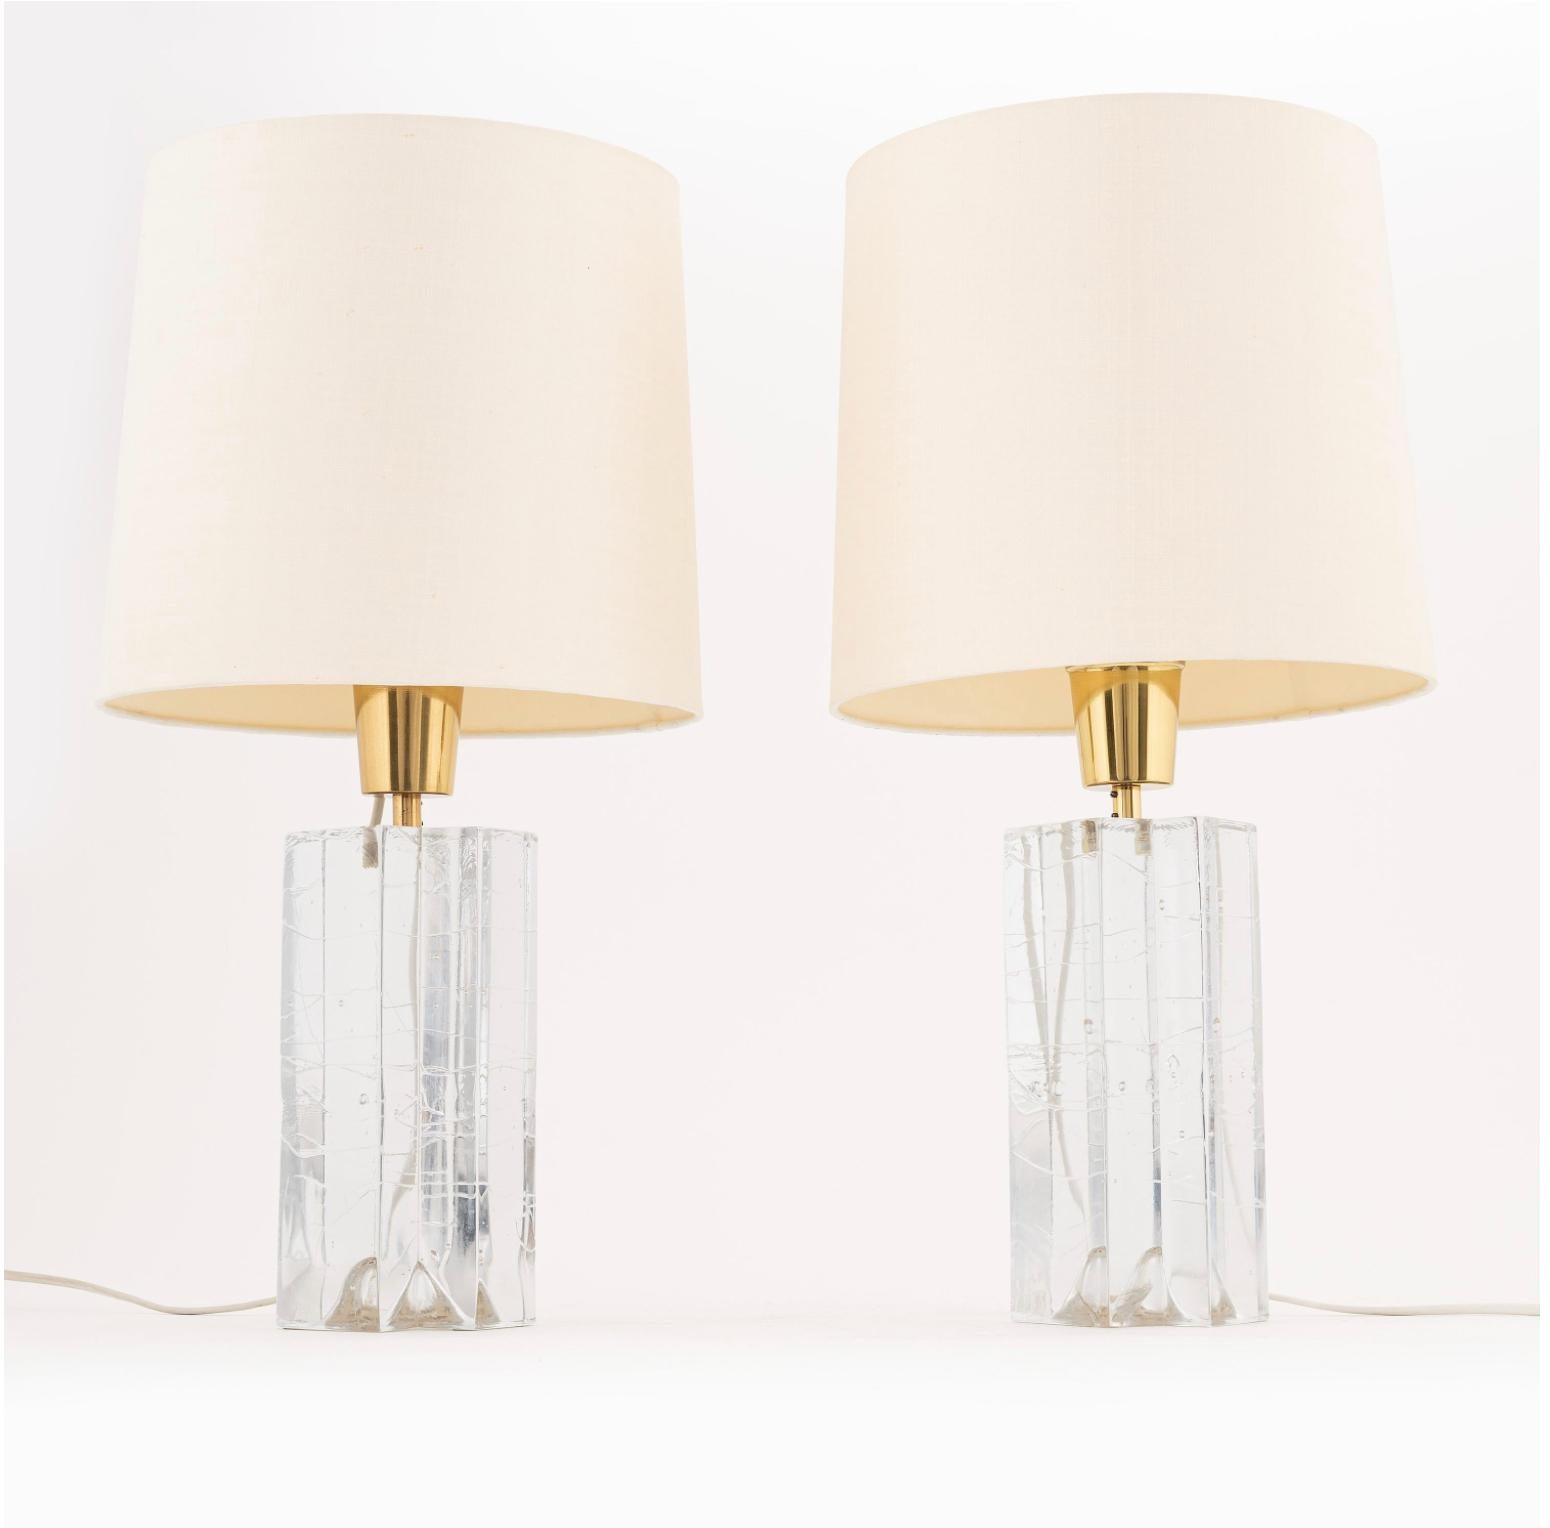 Timo Sarpaneva cast glass table lamps Model Arkipelago for Ittala 1960s.
Good condition price for the pair
Electrical functions not tested.
A pair of impressive table lamps in glass model 